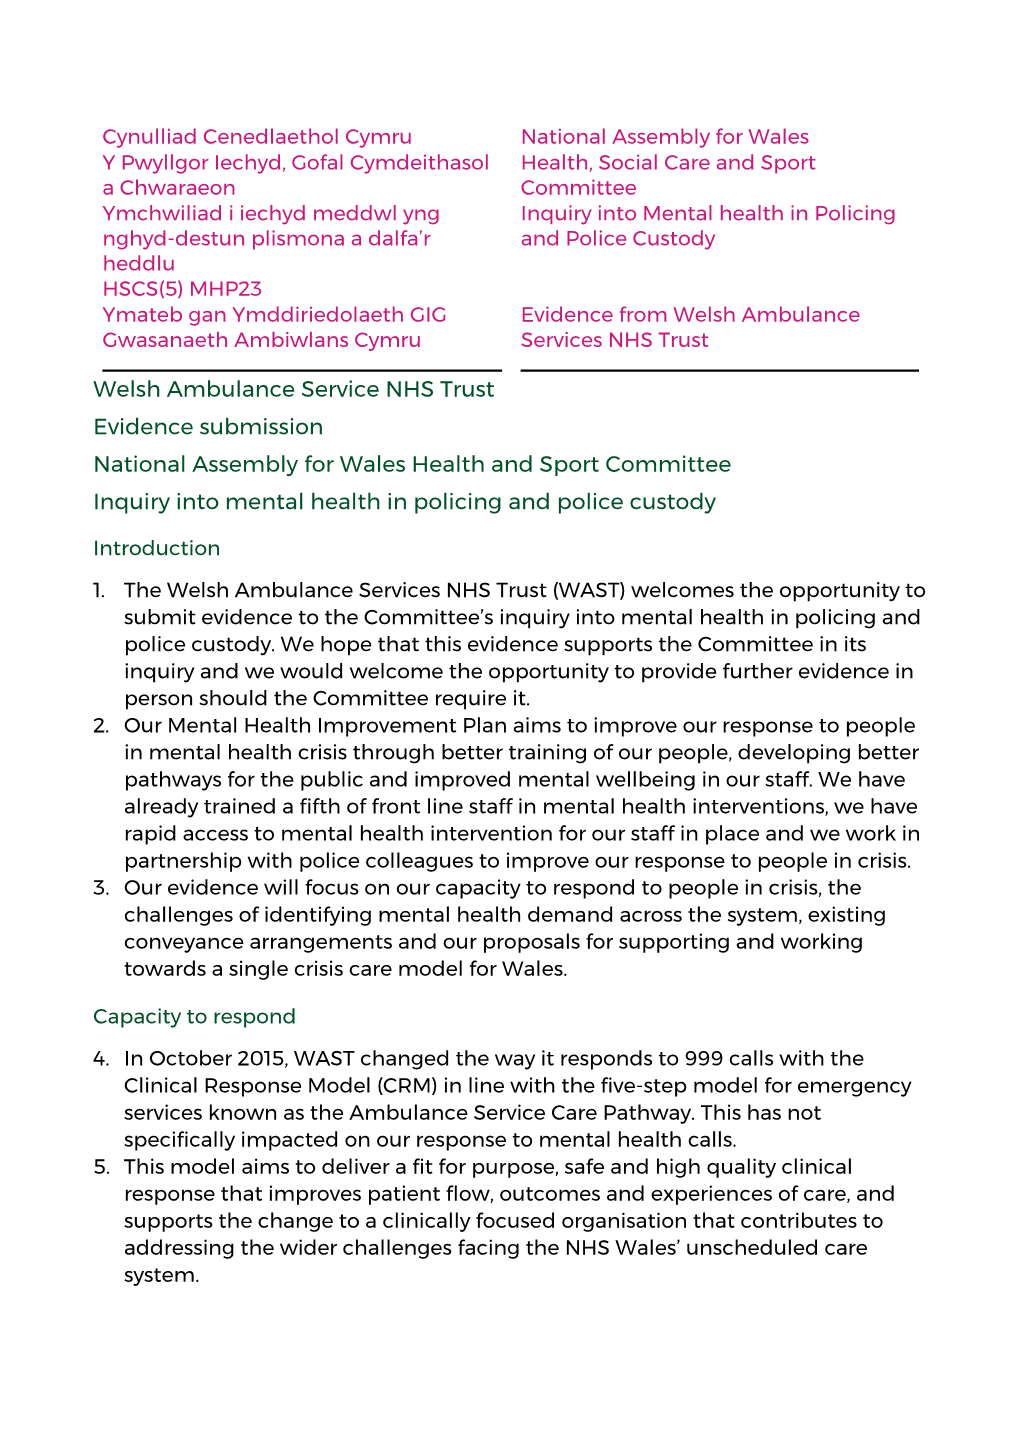 Welsh Ambulance Service NHS Trust Evidence Submission National